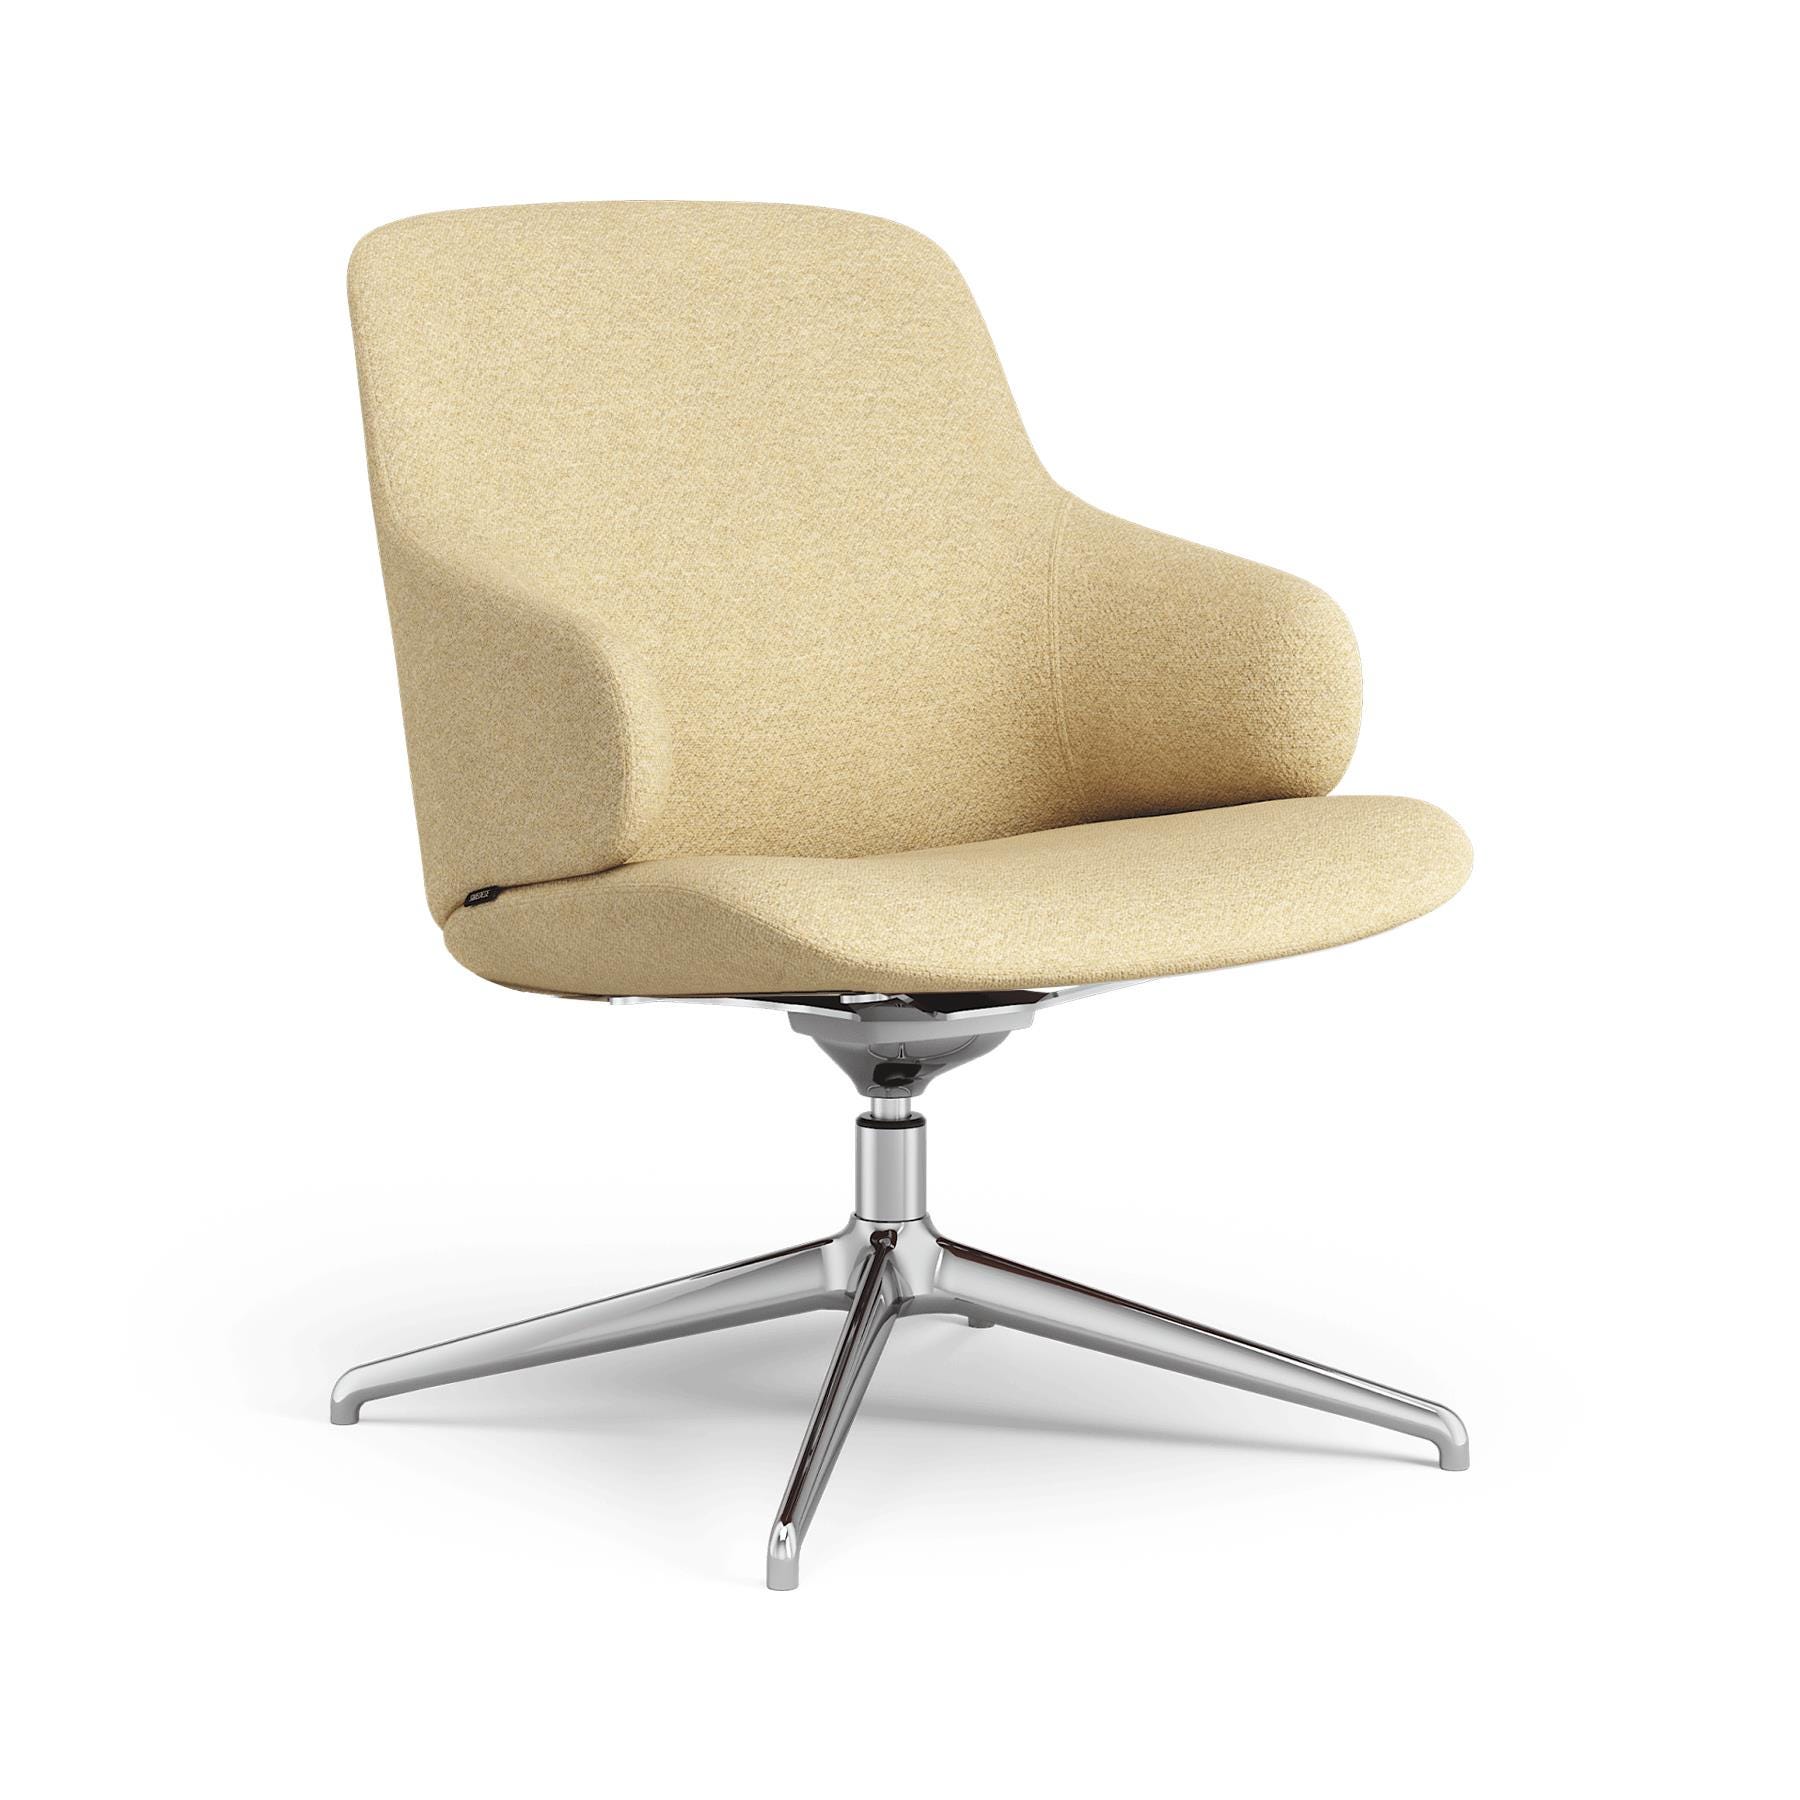 Swedese Amstelle Easy Chair Swivel Polished Aluminium Ecriture 0410 Cream Designer Furniture From Holloways Of Ludlow